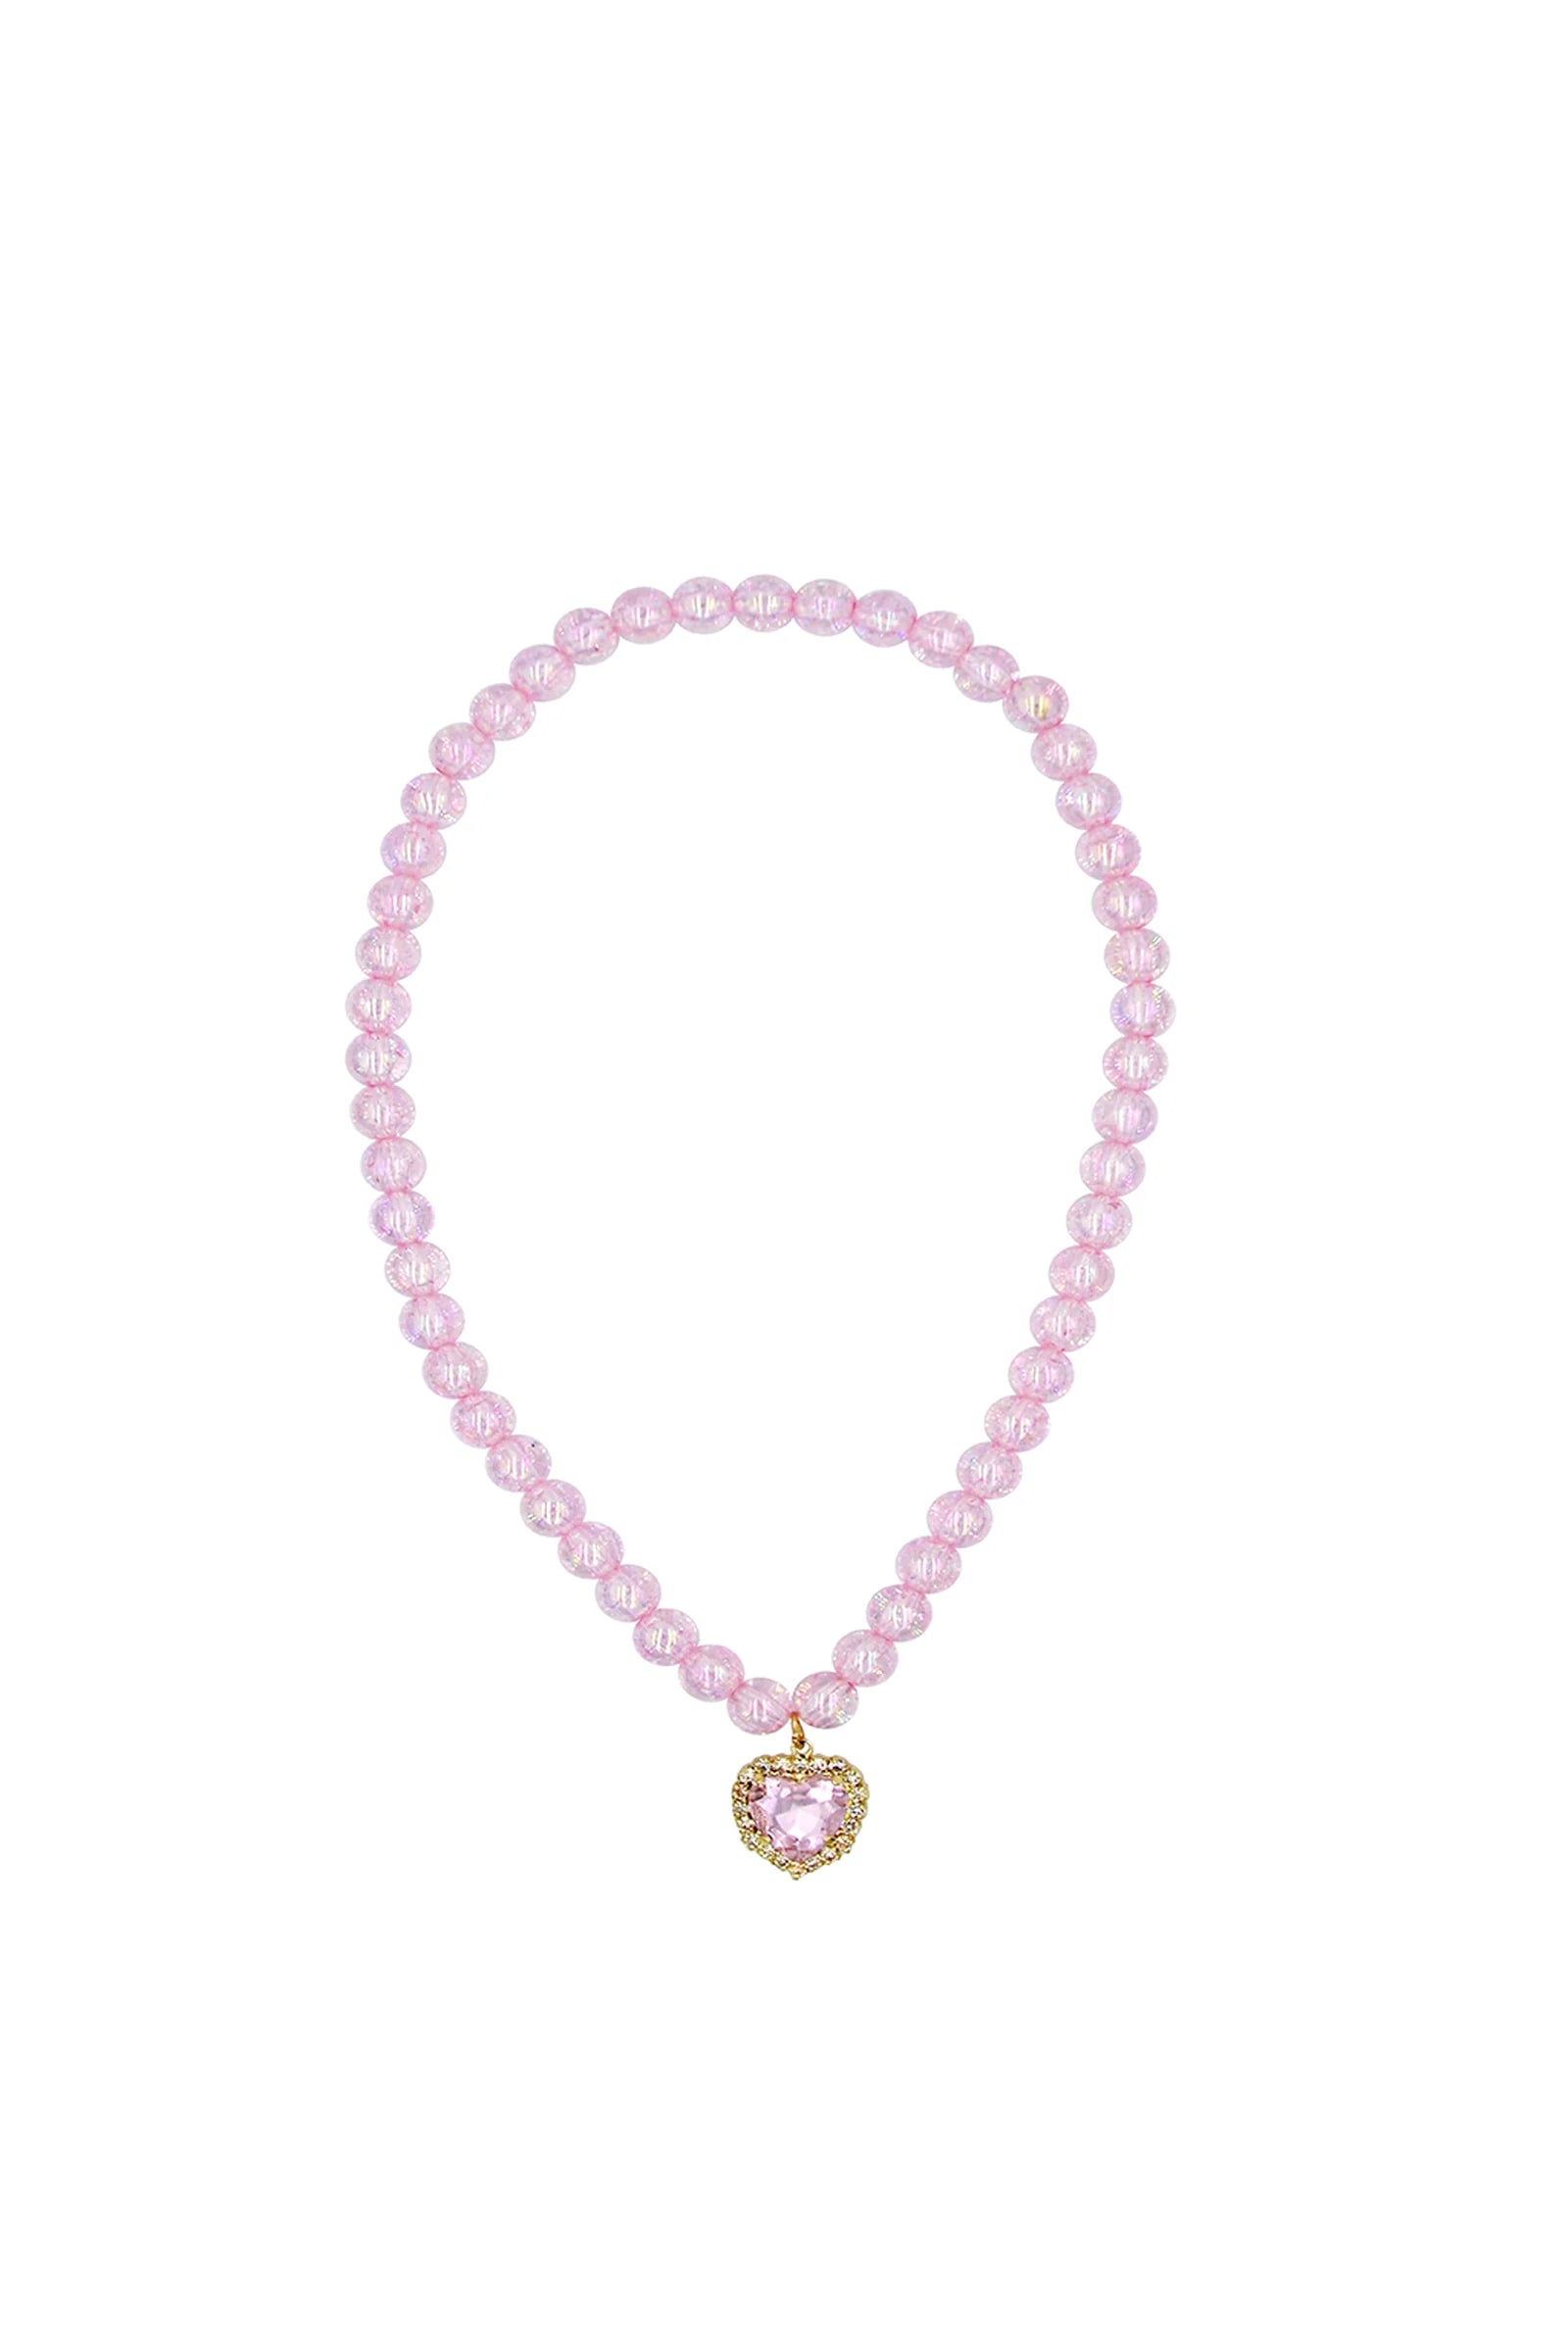 Enchanting Heart Necklace by Great Pretenders #86123